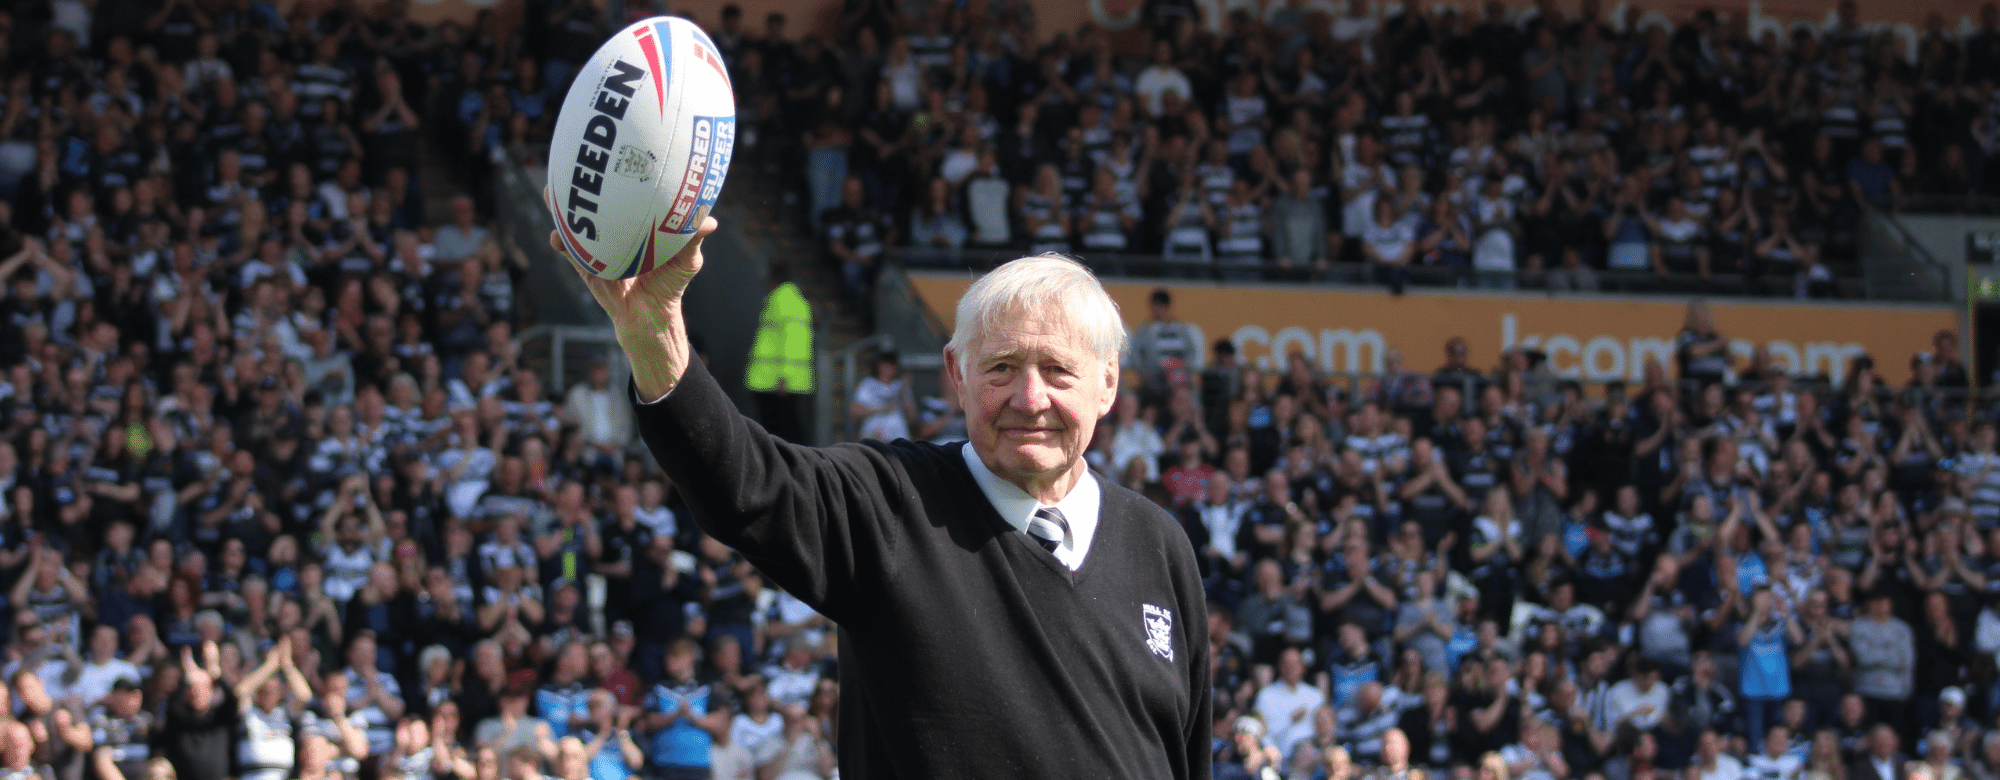 #DerbyDay: Johnny Whiteley MBE To Deliver Match Ball